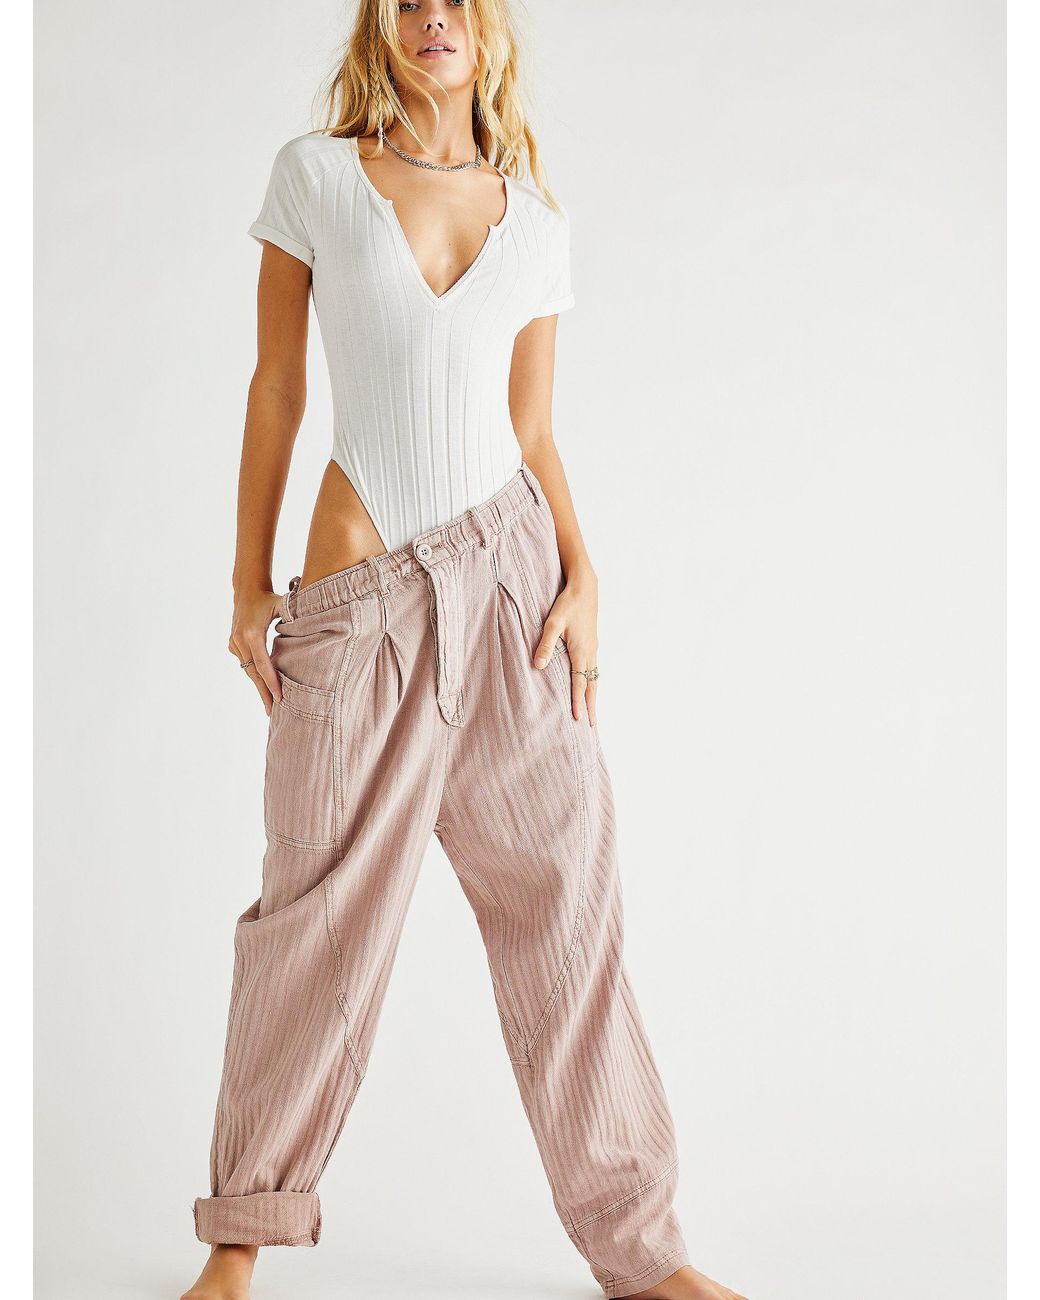 Free People Livin In The City Seamed Pants